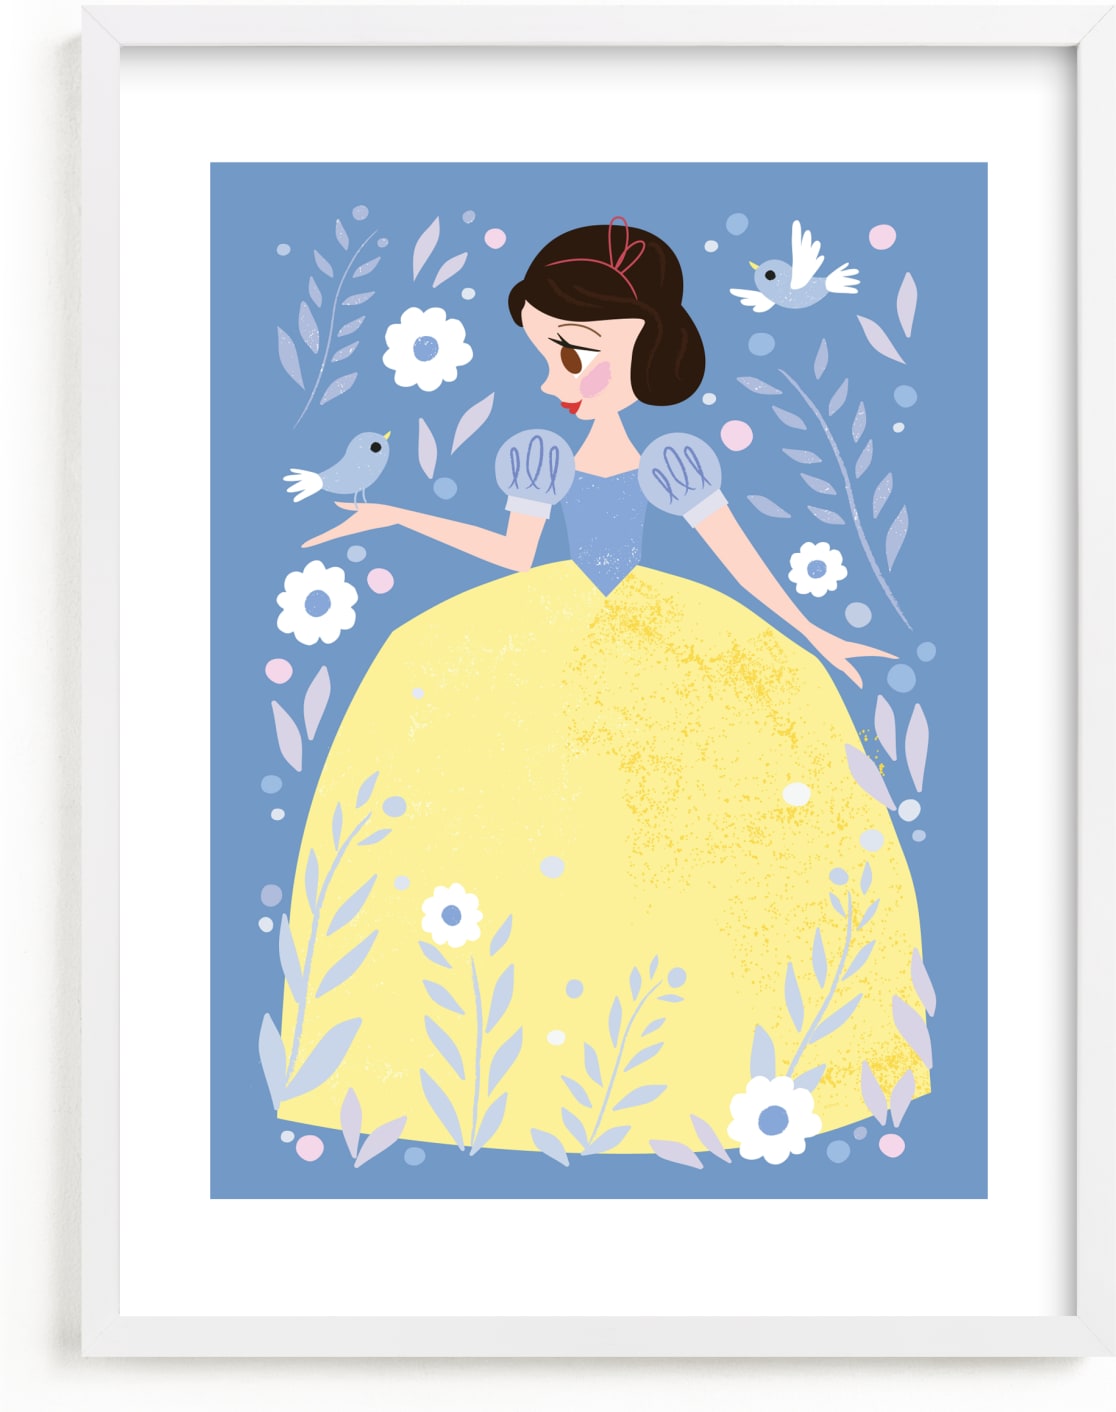 This is a blue disney art by Angela Thompson called Disney Enchanted Snow White.